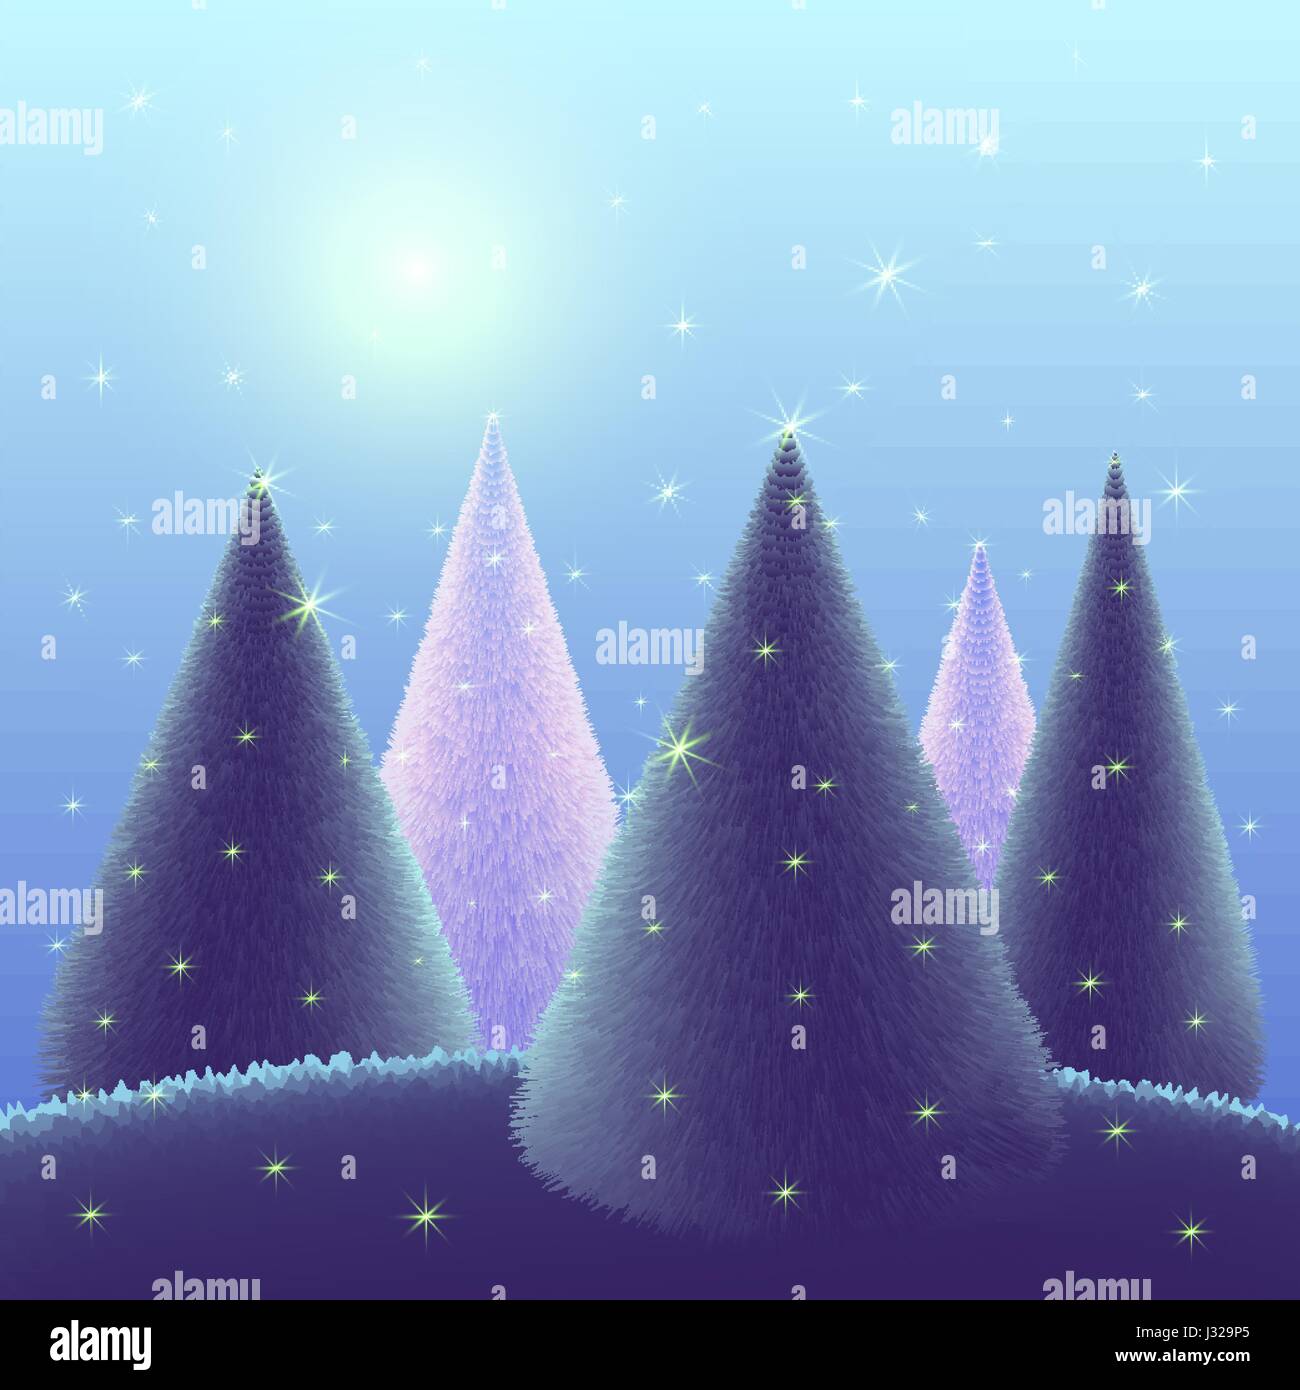 Christmas trees on blue background landscape with stars. Magic forest  in the night sky. Vector illustration greeting card Merry Christmas and Happy N Stock Vector